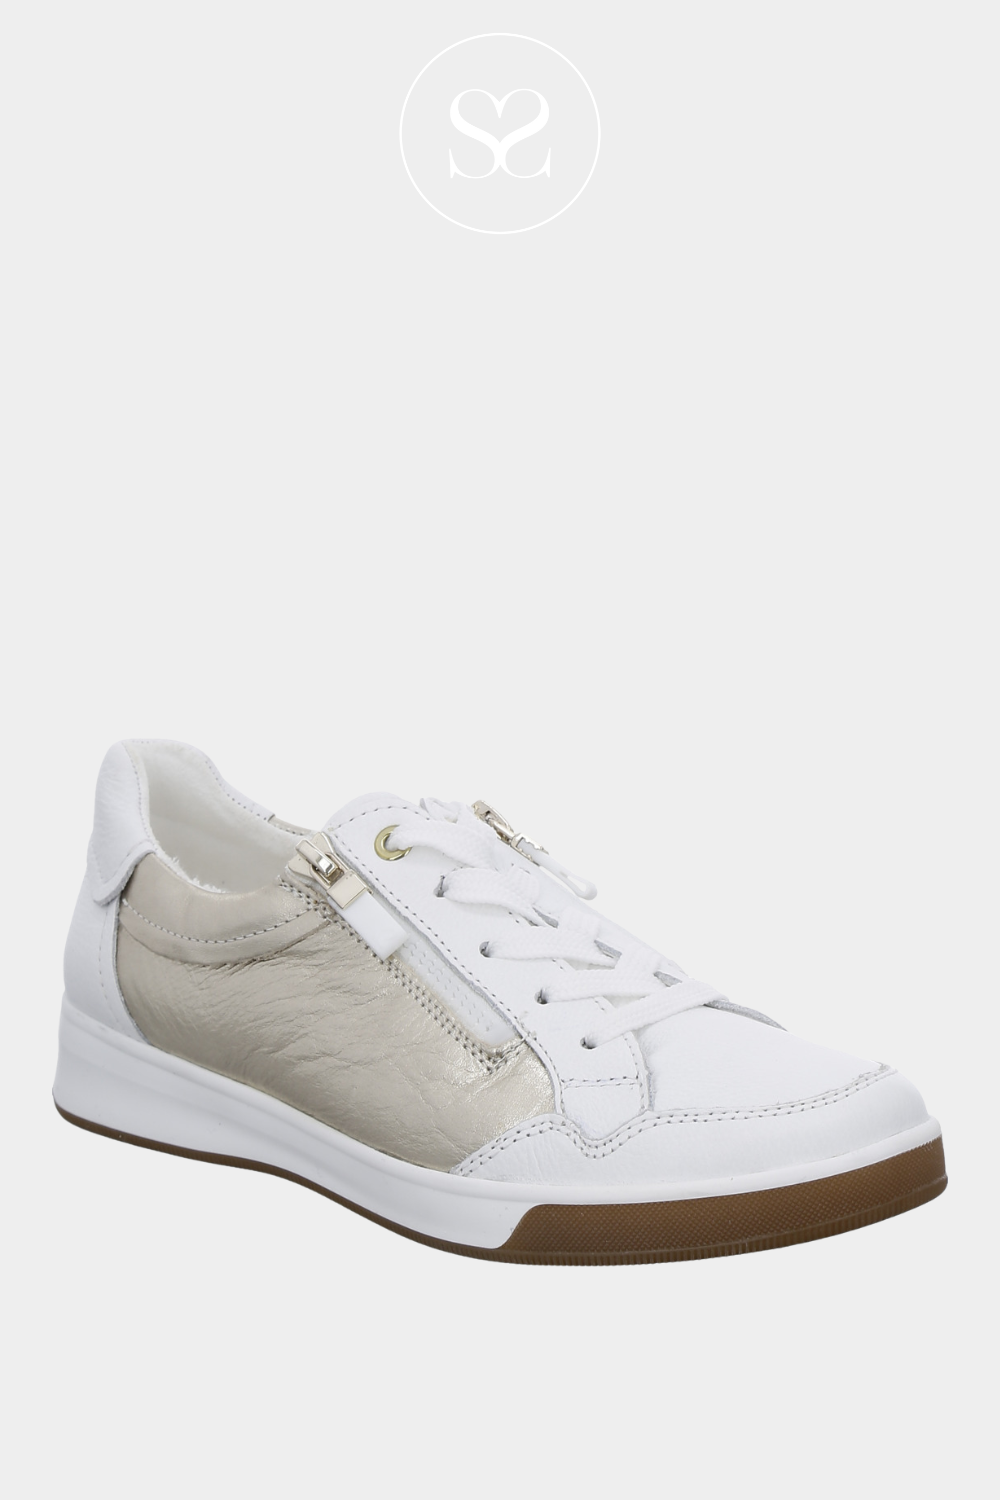 ARA 12-34423-04 WHITE FLAT SOFT LEATHER TRAINERS WITH GOLD PANEL AND SIDE ZIP